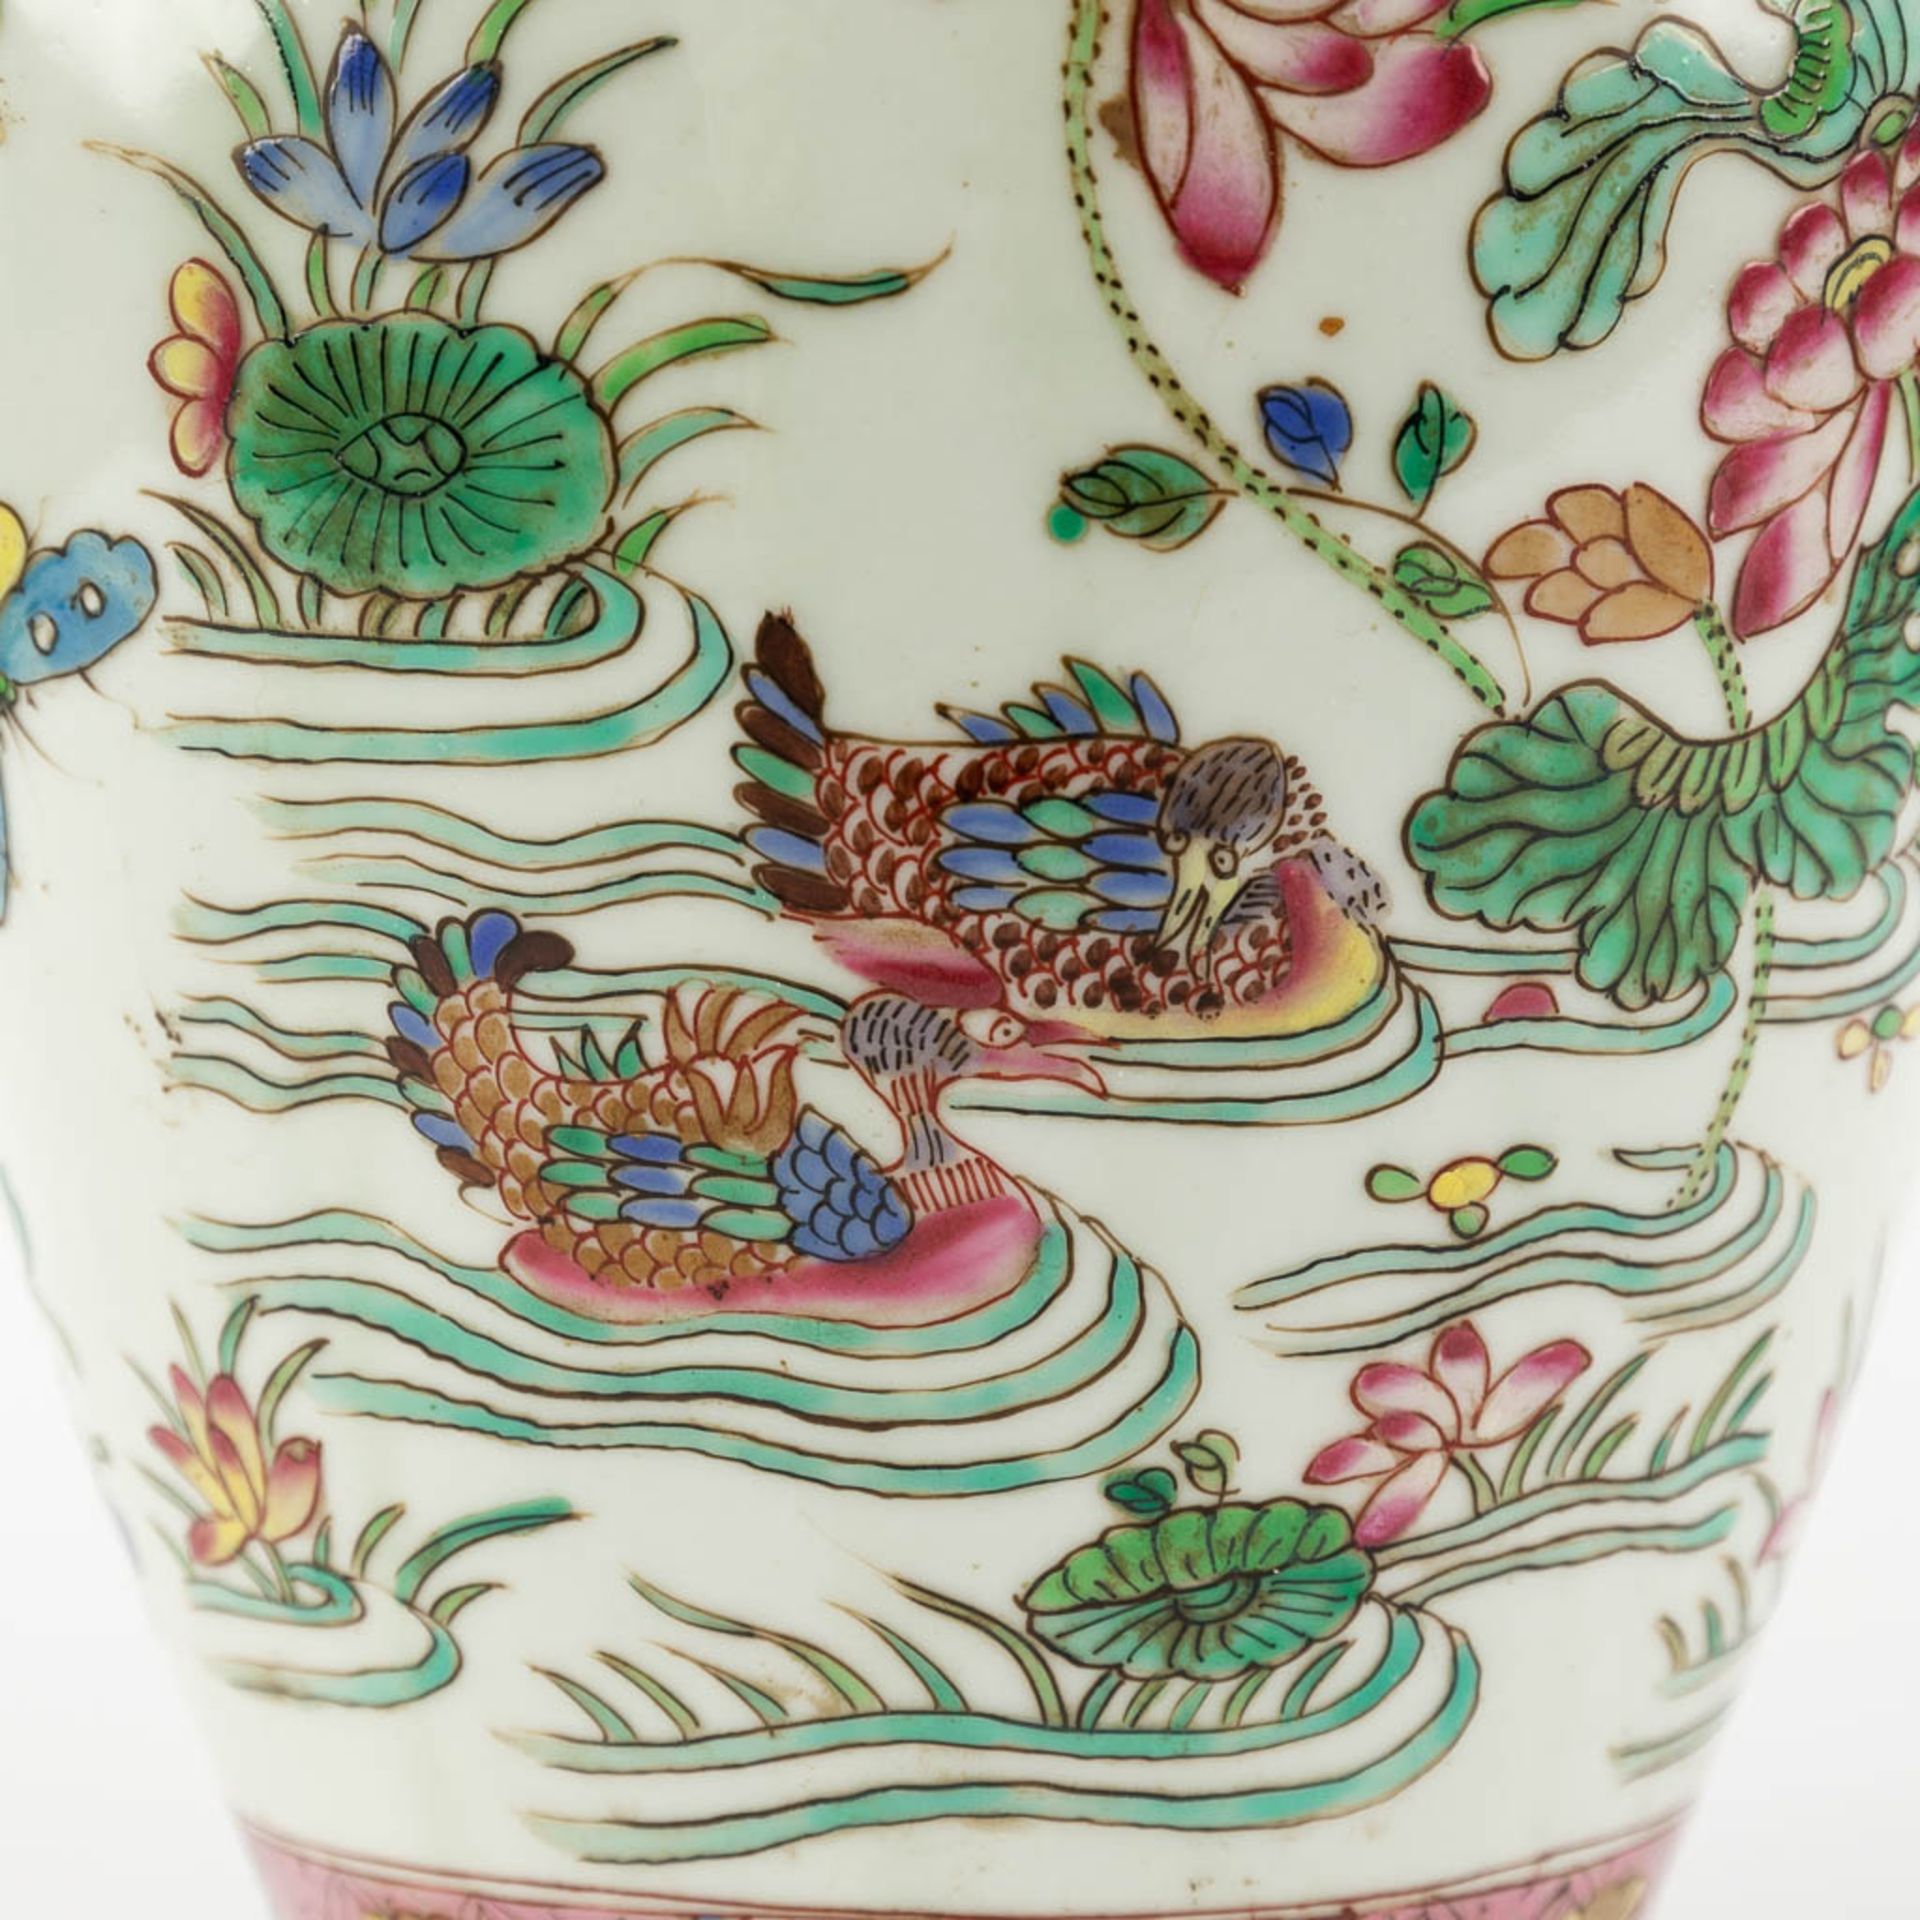 Samson, a 5-piece Kaststel, vases with lid and trumpet vases. Chinoiserie decor. (H:43 x D:21 cm) - Image 12 of 21